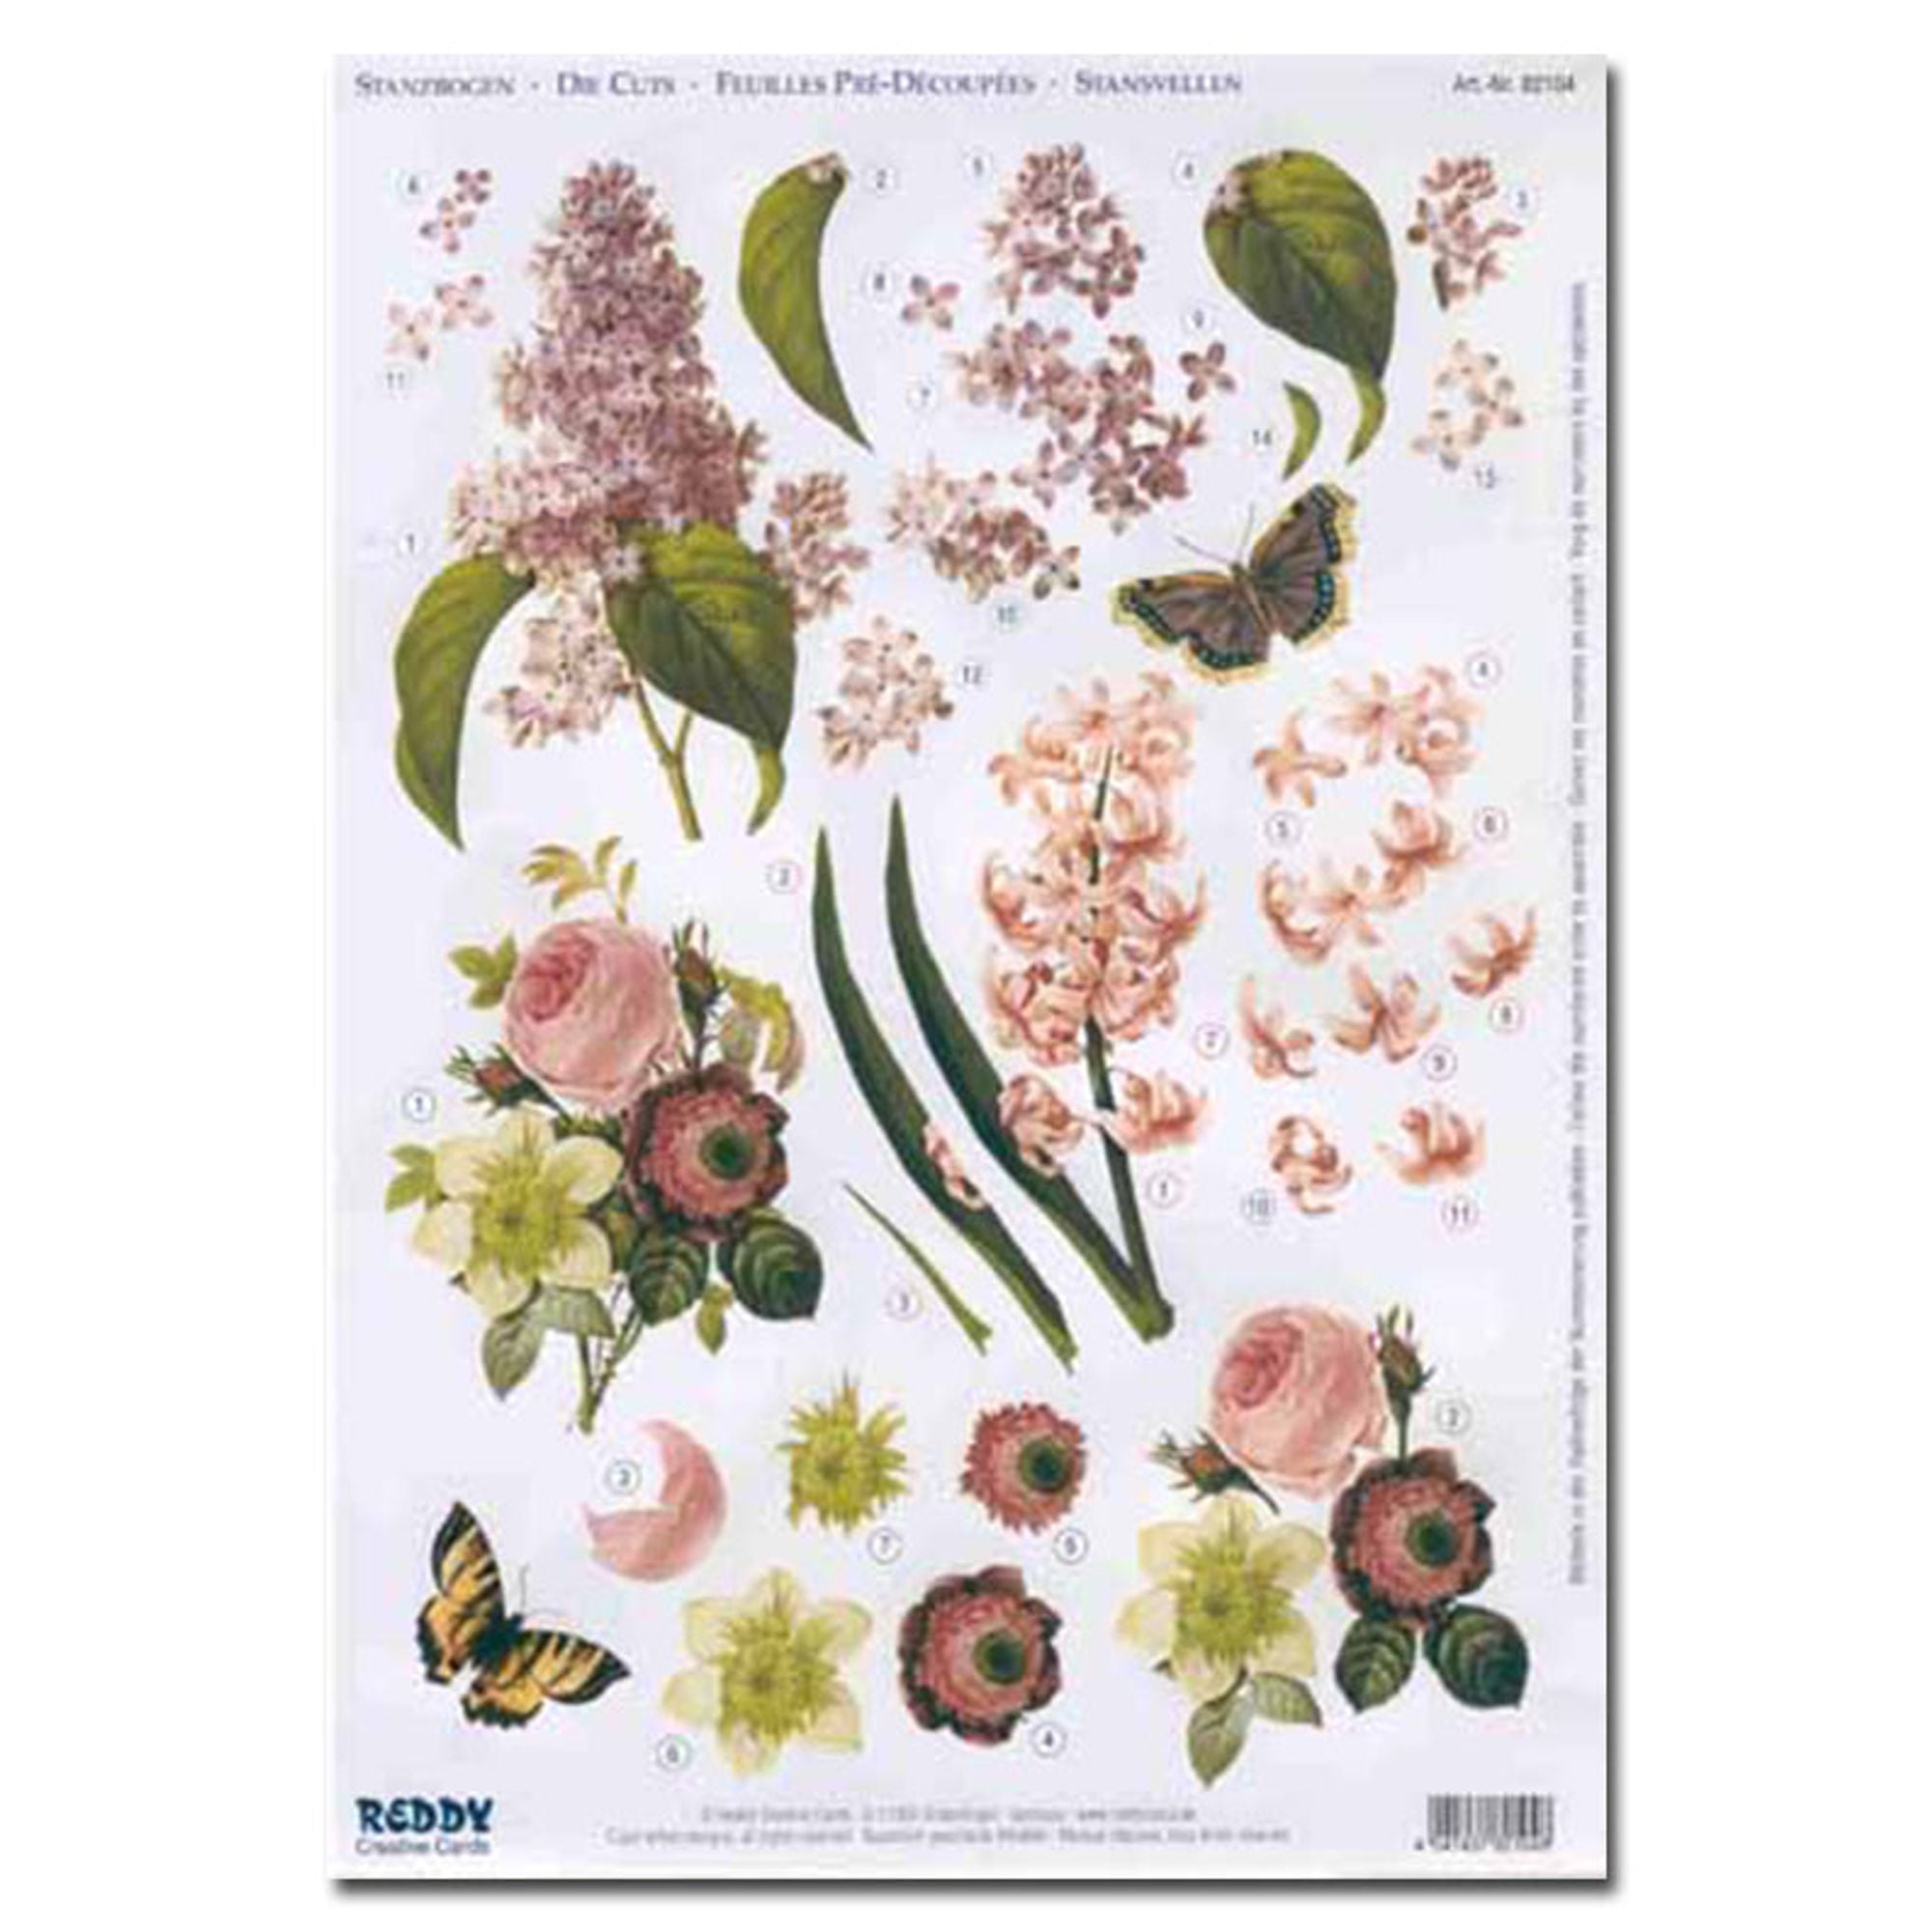 Reddy Creative Cards Die-Cut 3D Card Toppers - Lilac, Anemones,Garden Hyacinth